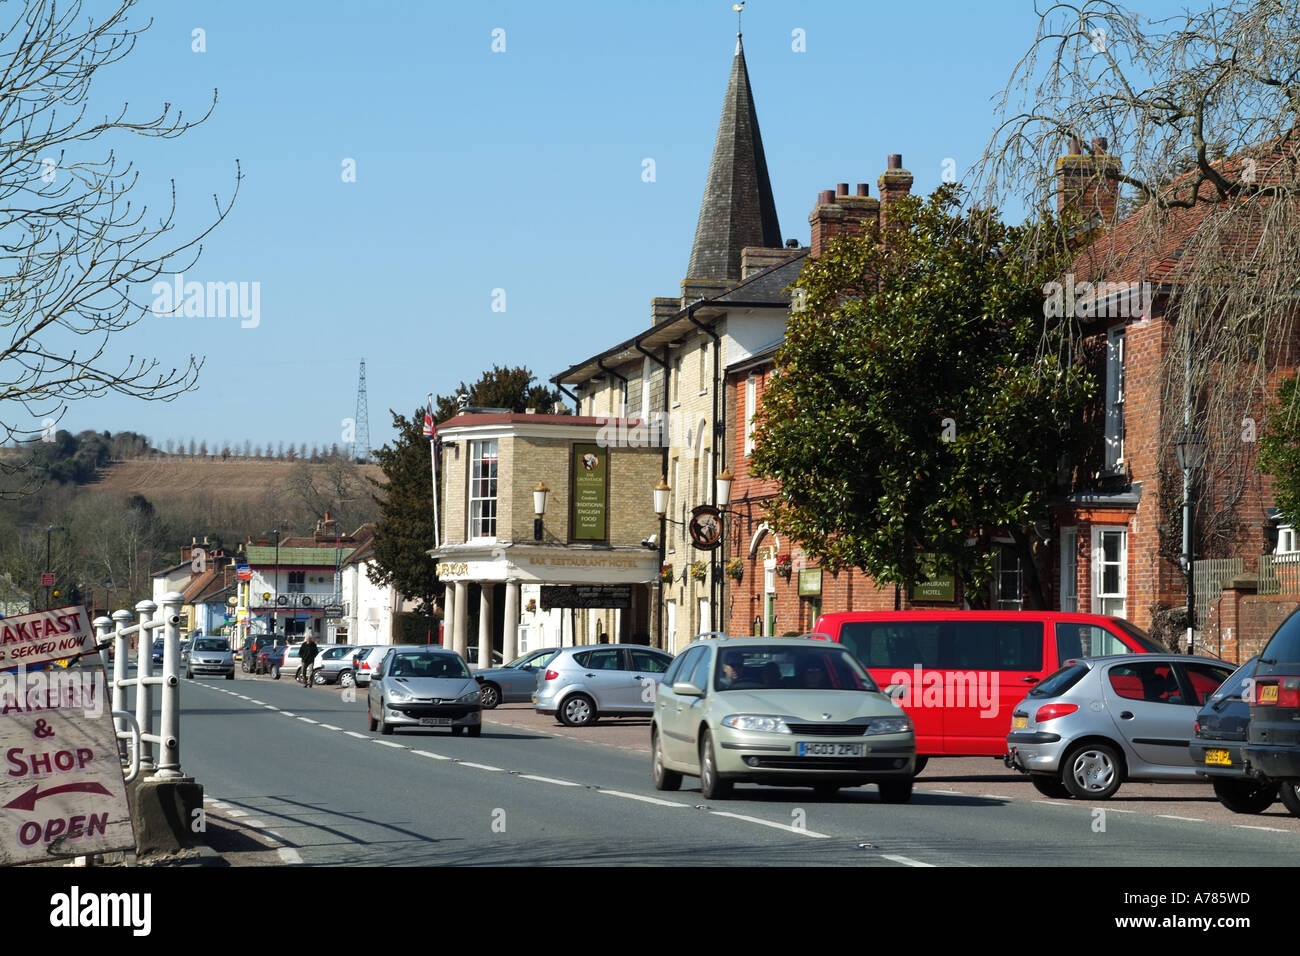 Stockbridge a small Hampshire town in the heart of the Test Valley  in southern England UK. The main street Stock Photo